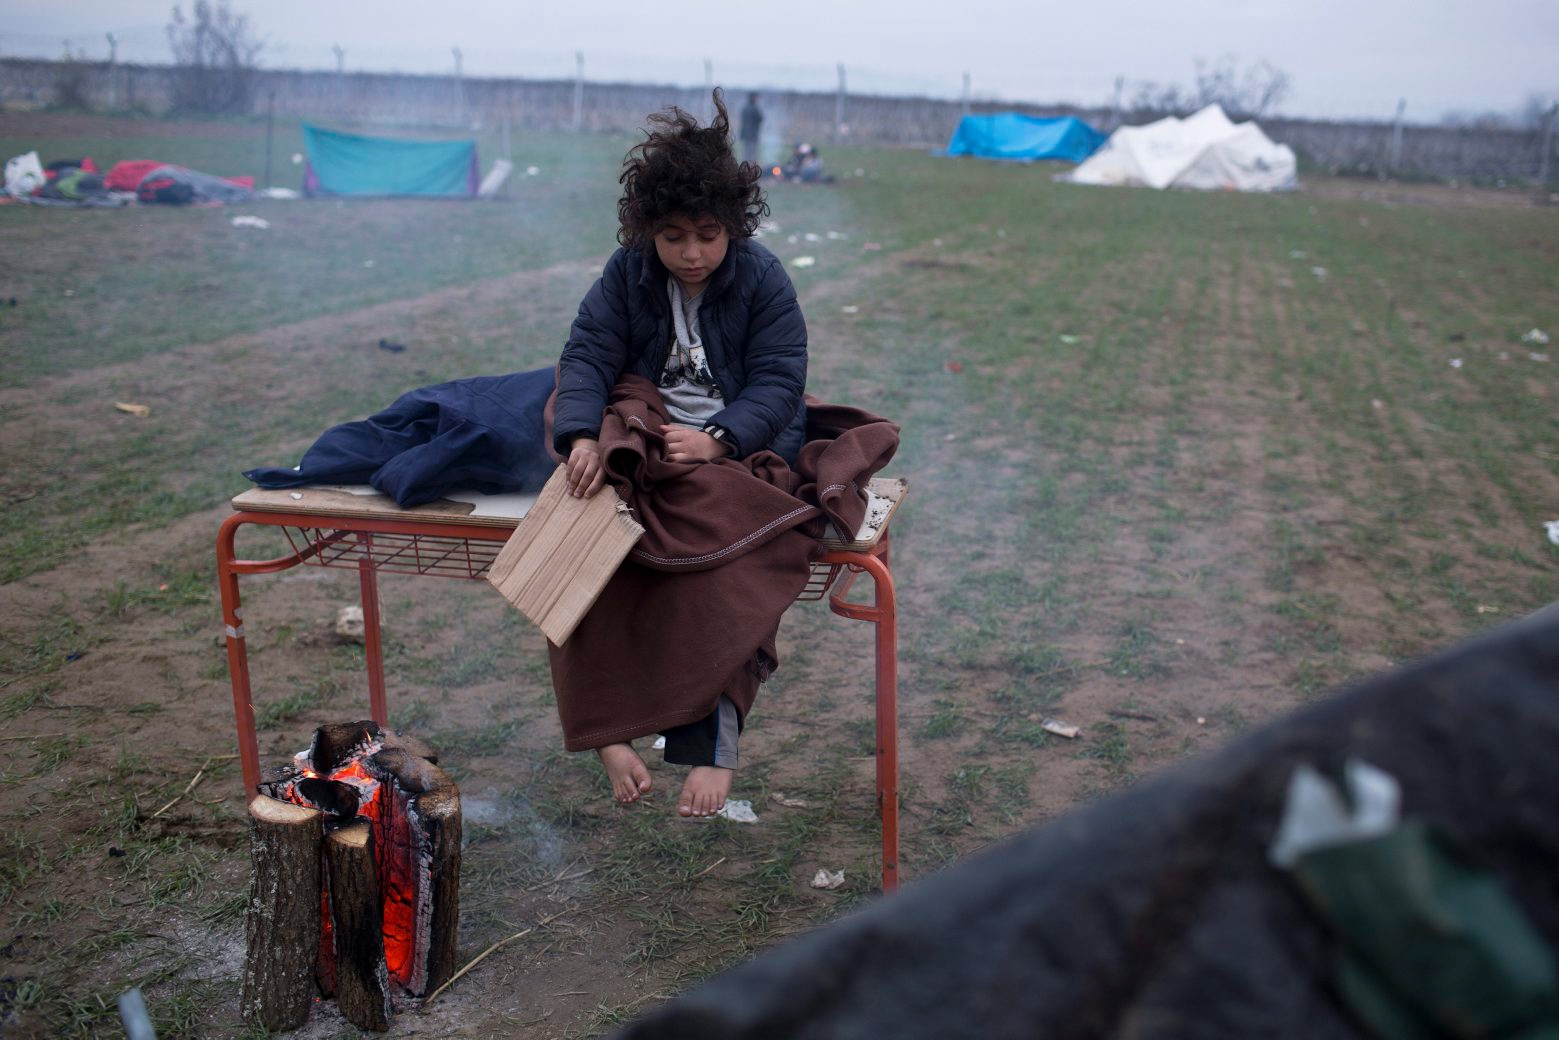 An Iranian child warms near a fire as she wait s to be allowed to cross the Macedonian borders, near the northern Greek village of Idomeni, Friday, Dec. 4, 2015. Macedonian authorities are allowing only people from the war-wracked countries of Syria, Afghanistan and Iraq to cross from Greece on their way to other European Union countries, leading to protests from those from other countries who have been blocking the crossing for all since Wednesday.(AP Photo/Petros Giannakouris) Greece Migrants